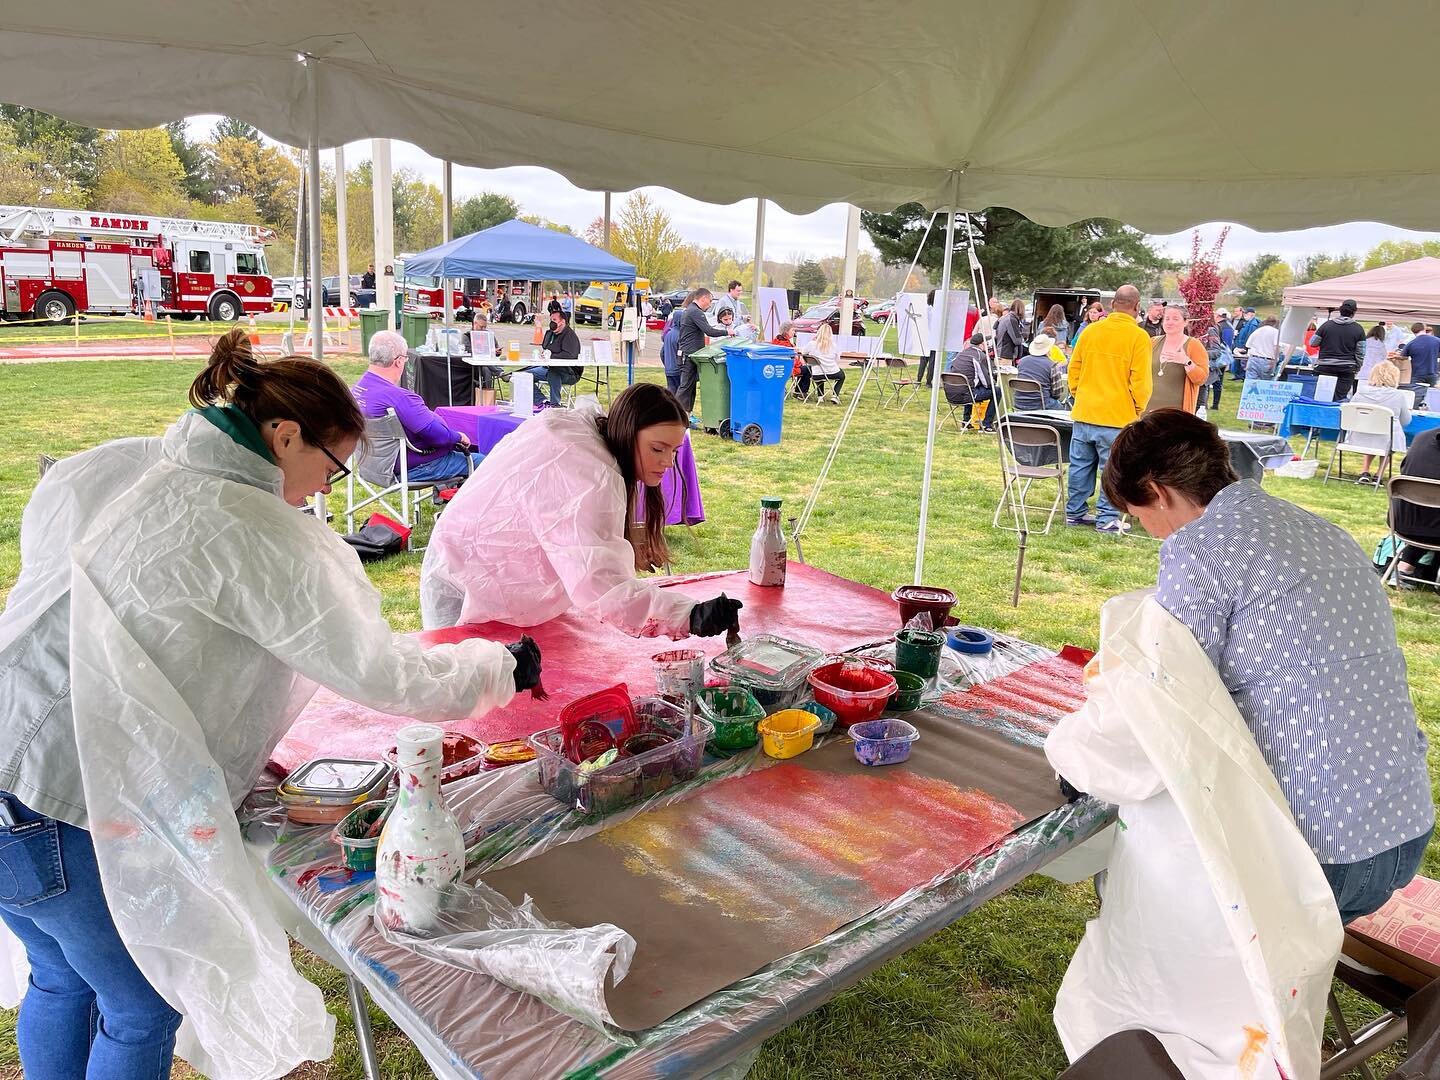 The MLK39 Racial Equity mural community paint day in Hamden. At the Earth Day celebration, we set up a few tables with prepped Polytab for the mural. 61 participants painted 14 book spines for the library mural. The next community paint day will be o